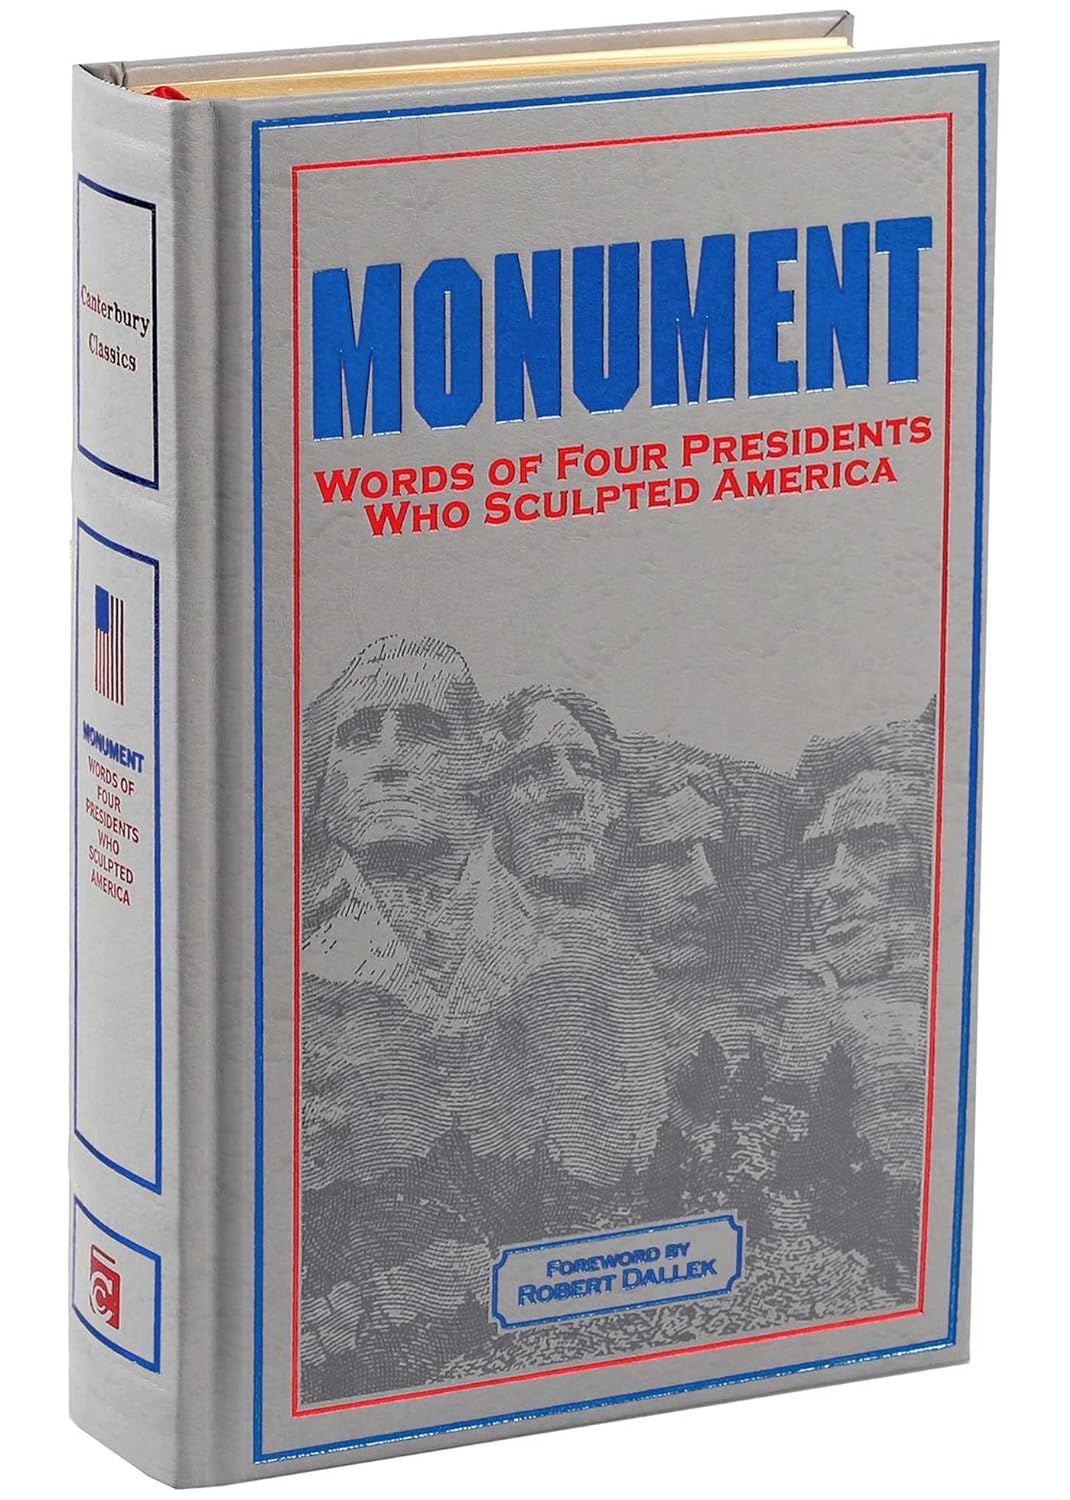  Monument: Words of Four Presidents Who Sculpted America: Words of Four Presidents Who Sculpted America 